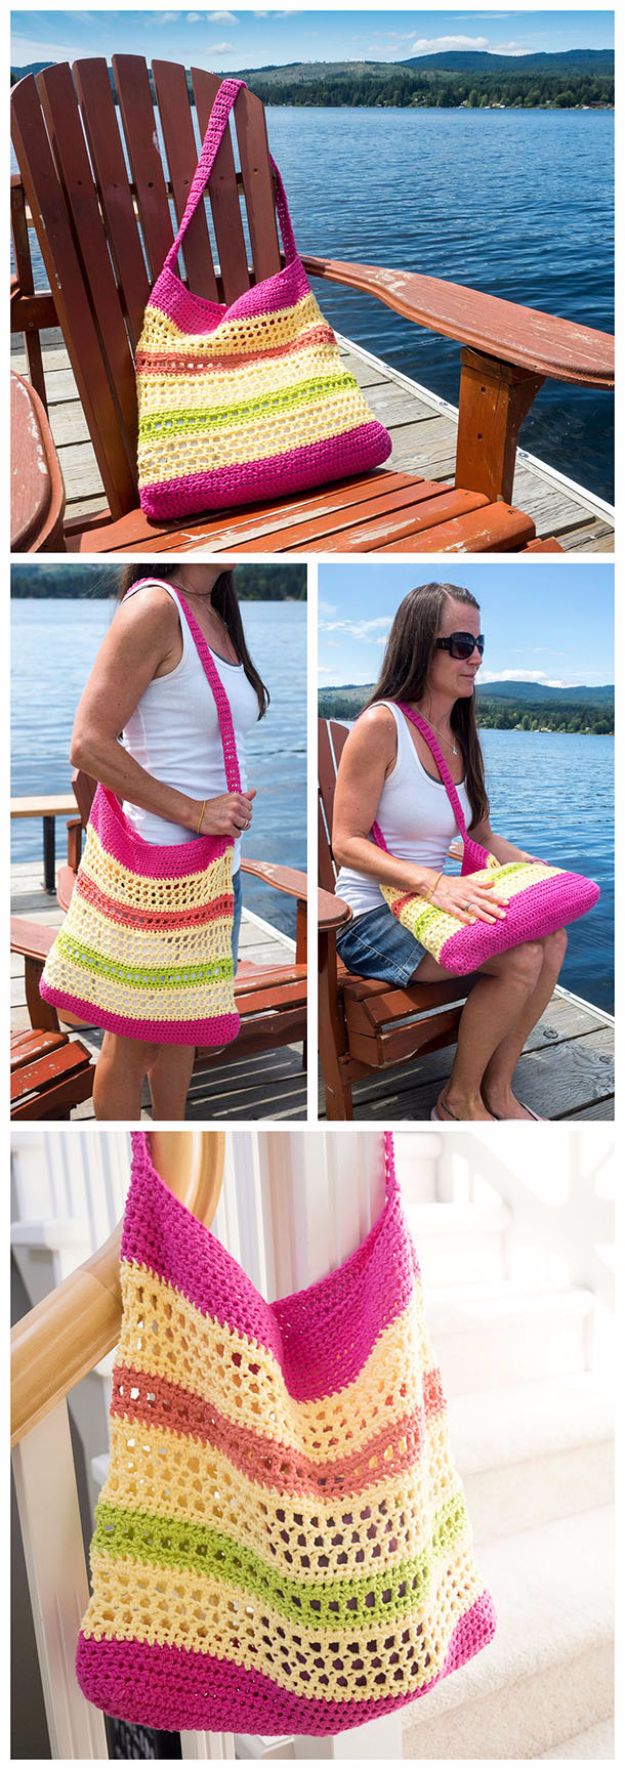 DIY Bags for Summer - Crochet Beach Tote Bag - Easy Ideas to Make for Beach and Pool - Quick Projects for a Bag on A Budget - Cute No Sew Idea, Quick Sewing Patterns - Paint and Crafts for Making Creative Beach Bags - Fun Tutorials for Kids, Teens, Teenagers, Girls and Adults